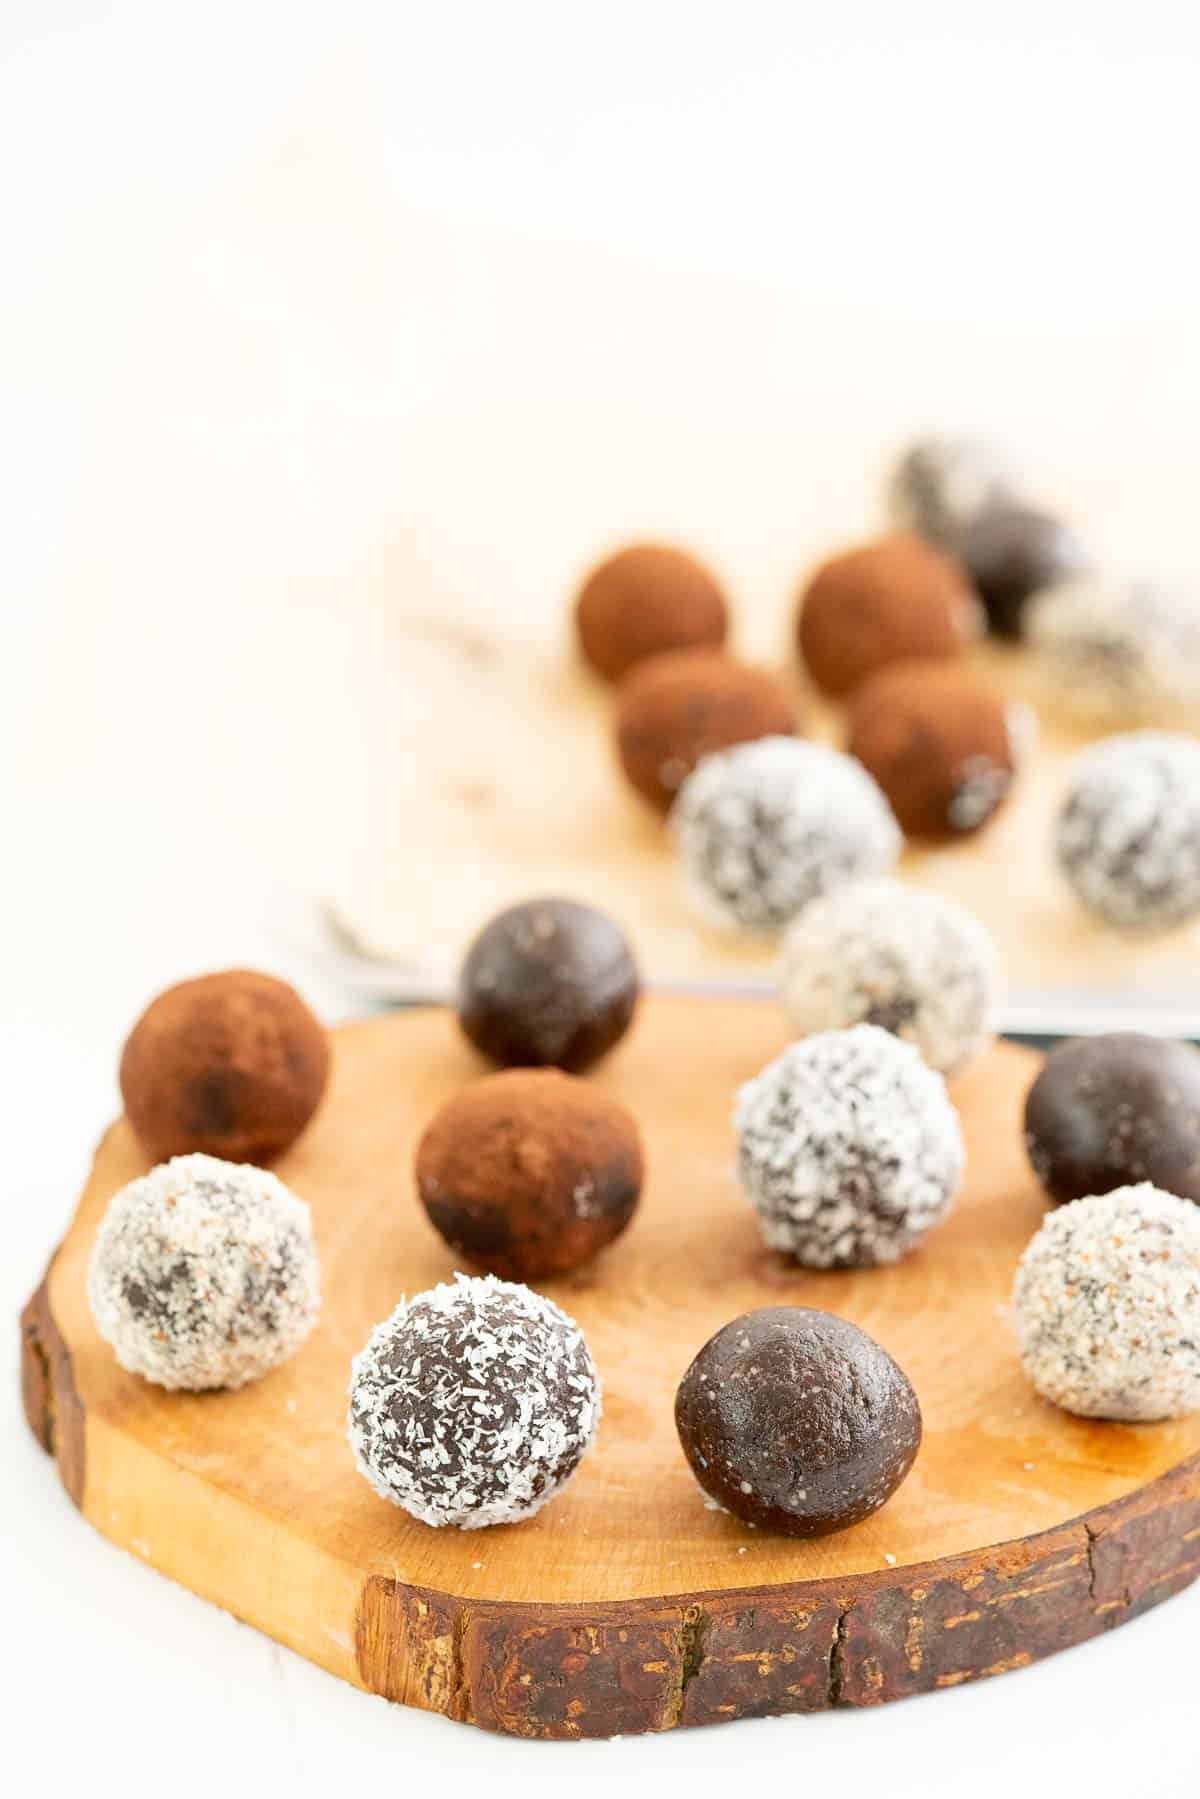 A selection of chocolate date balls presented on a rustic  wooden slab.